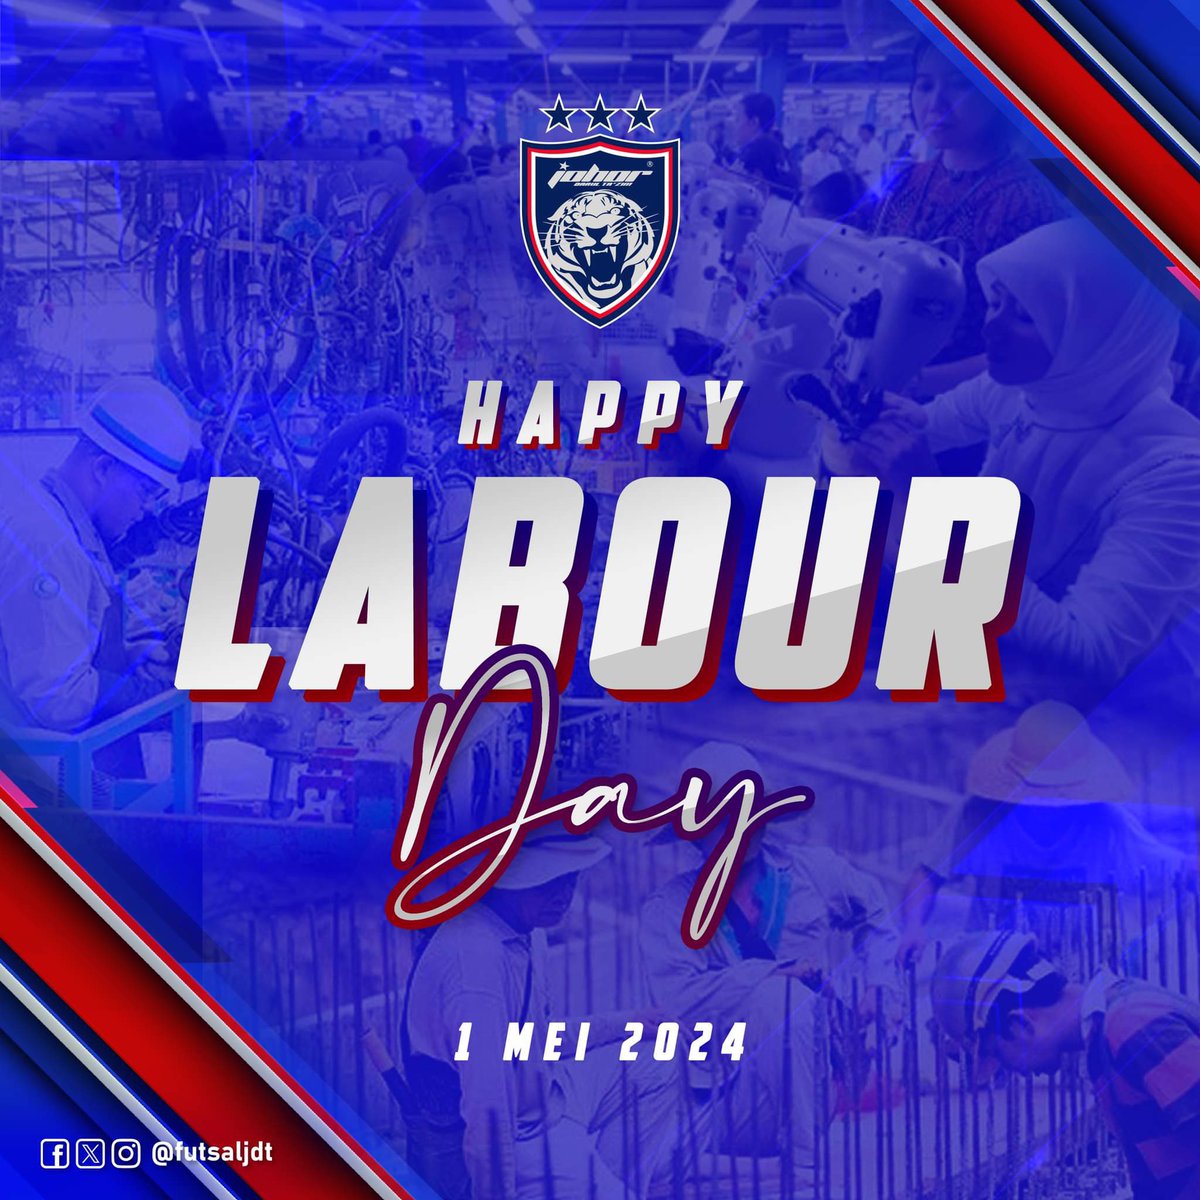 HAPPY LABOUR DAY

Johor Darul Ta’zim FC (JDT) would like to wish a very Happy Labour Day to all Southern Tigers fans. May all your hard work be rewarded and bring benefit to all of us. Luaskan Kuasamu Johor.

#MPFL2024
#JDTFutsal
#JDTFamily
#LuaskanKuasamuJohor